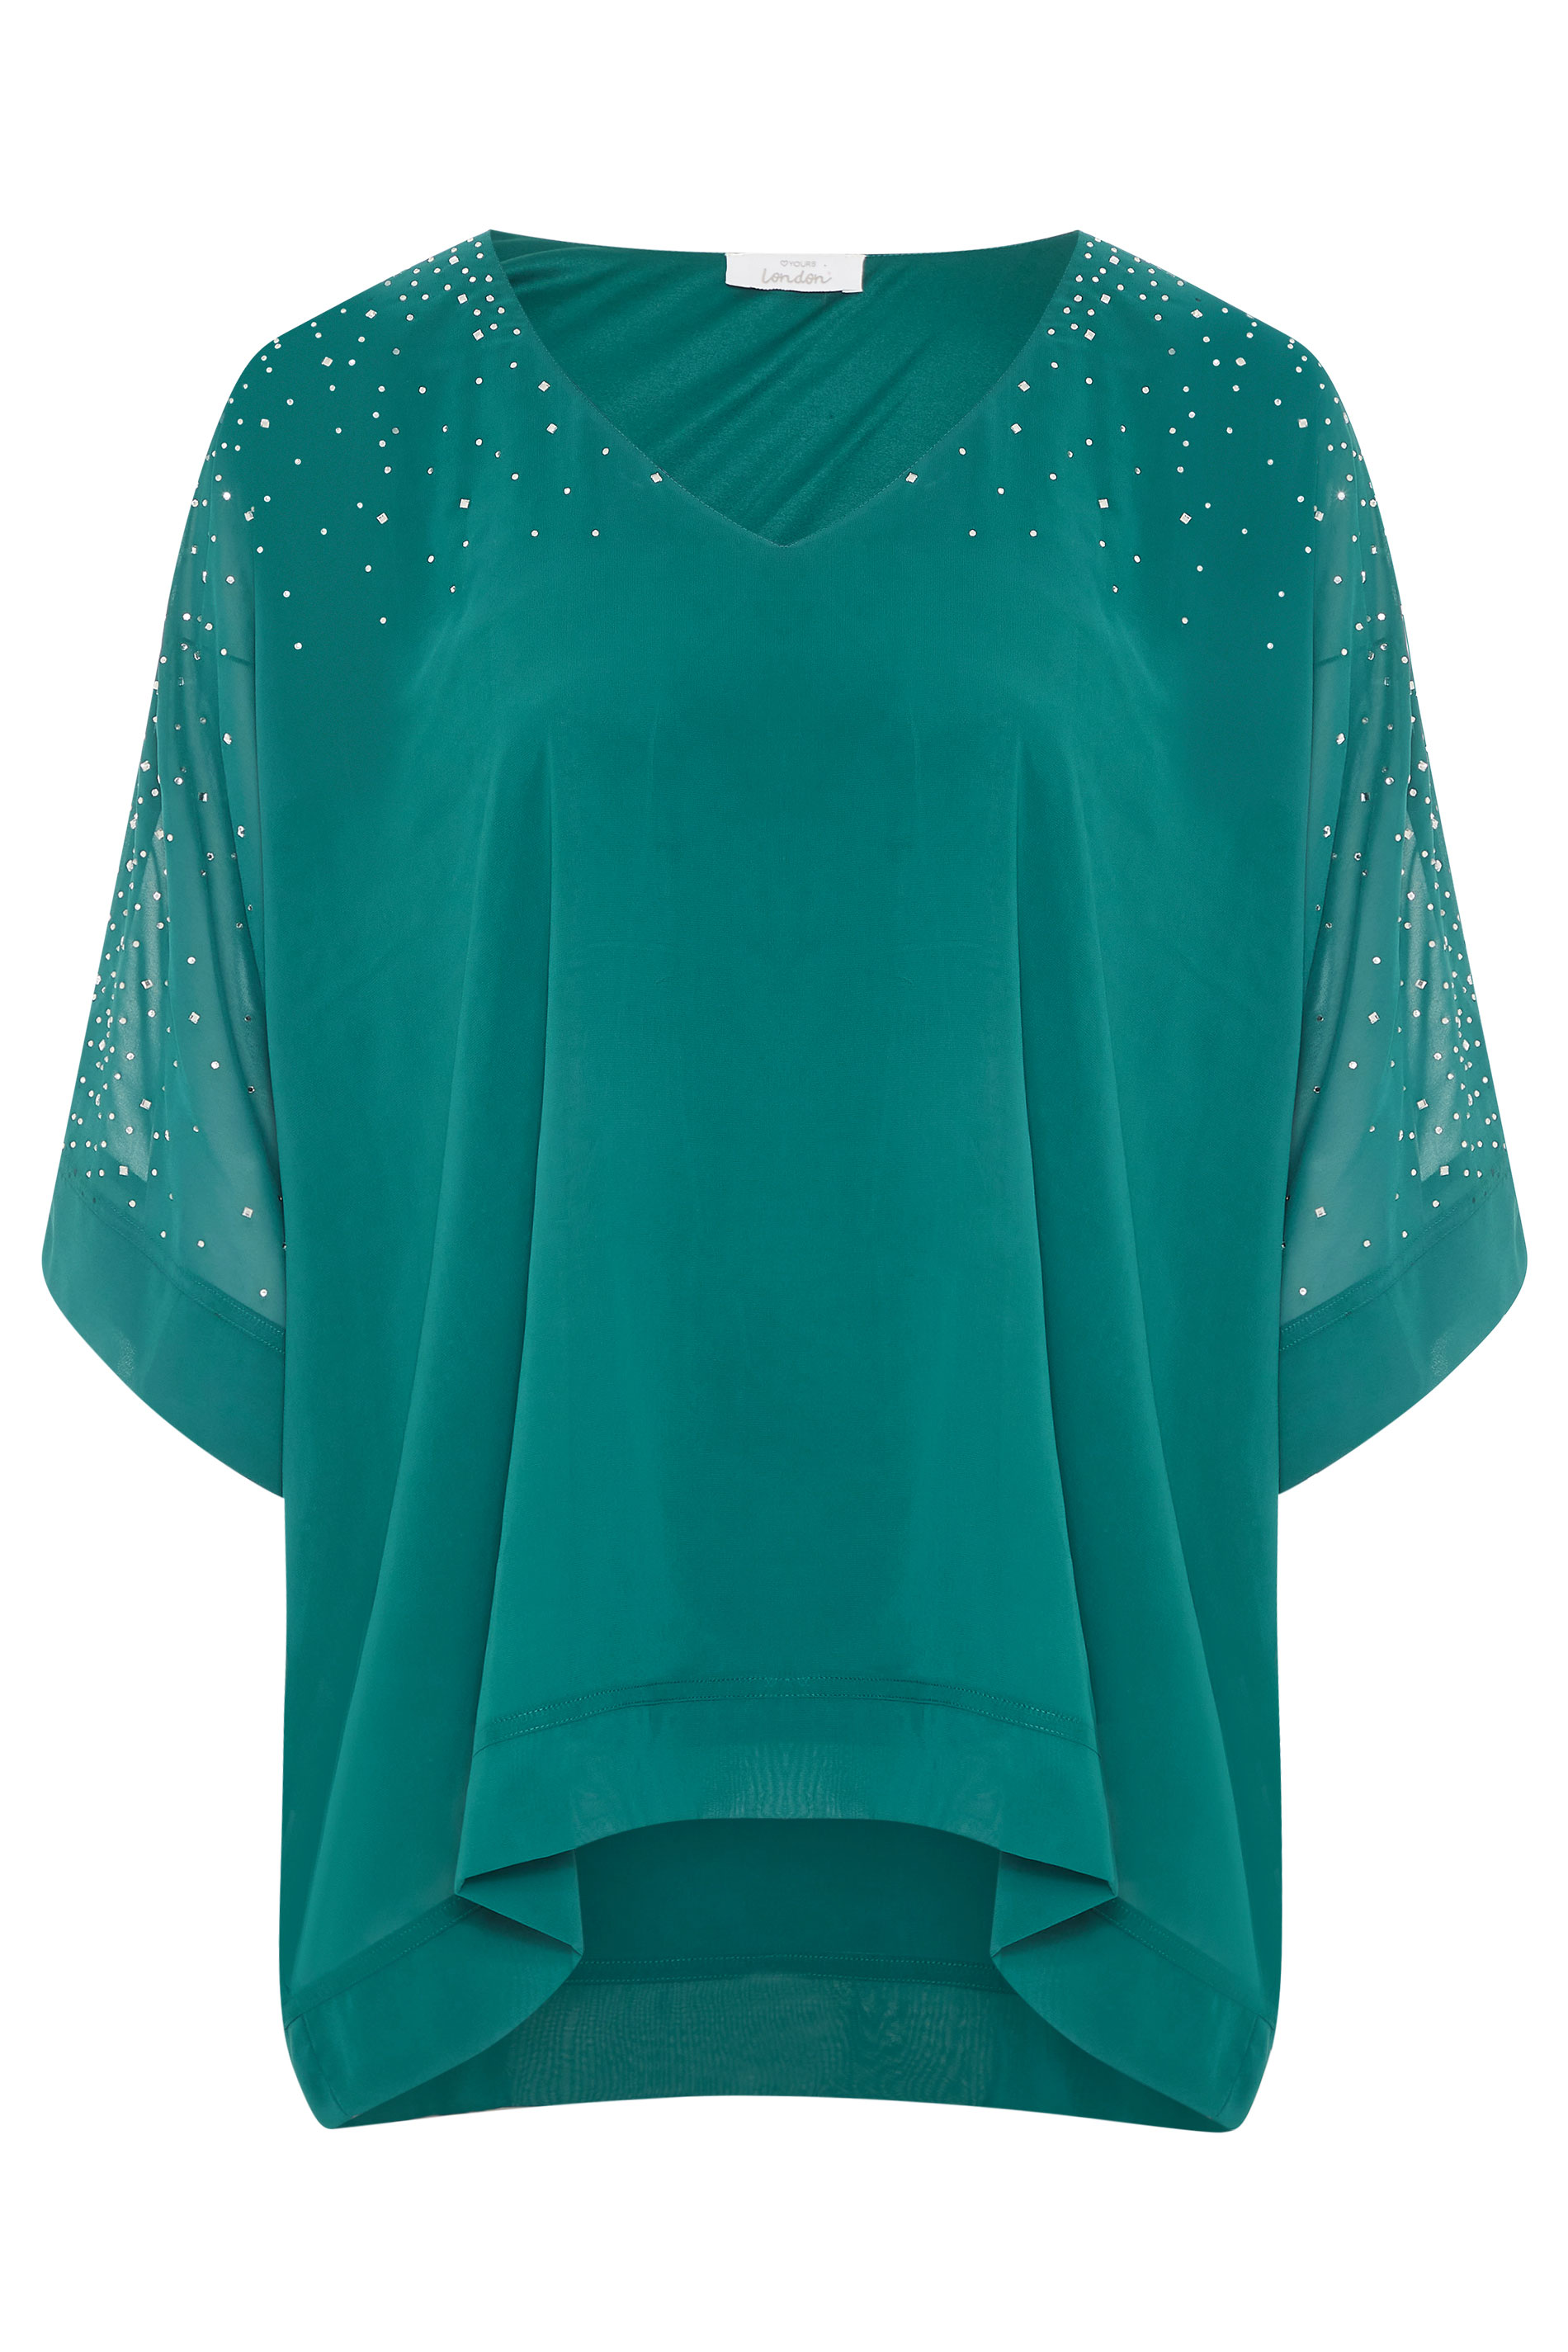 YOURS LONDON Green Diamante Cape Top | Yours Clothing